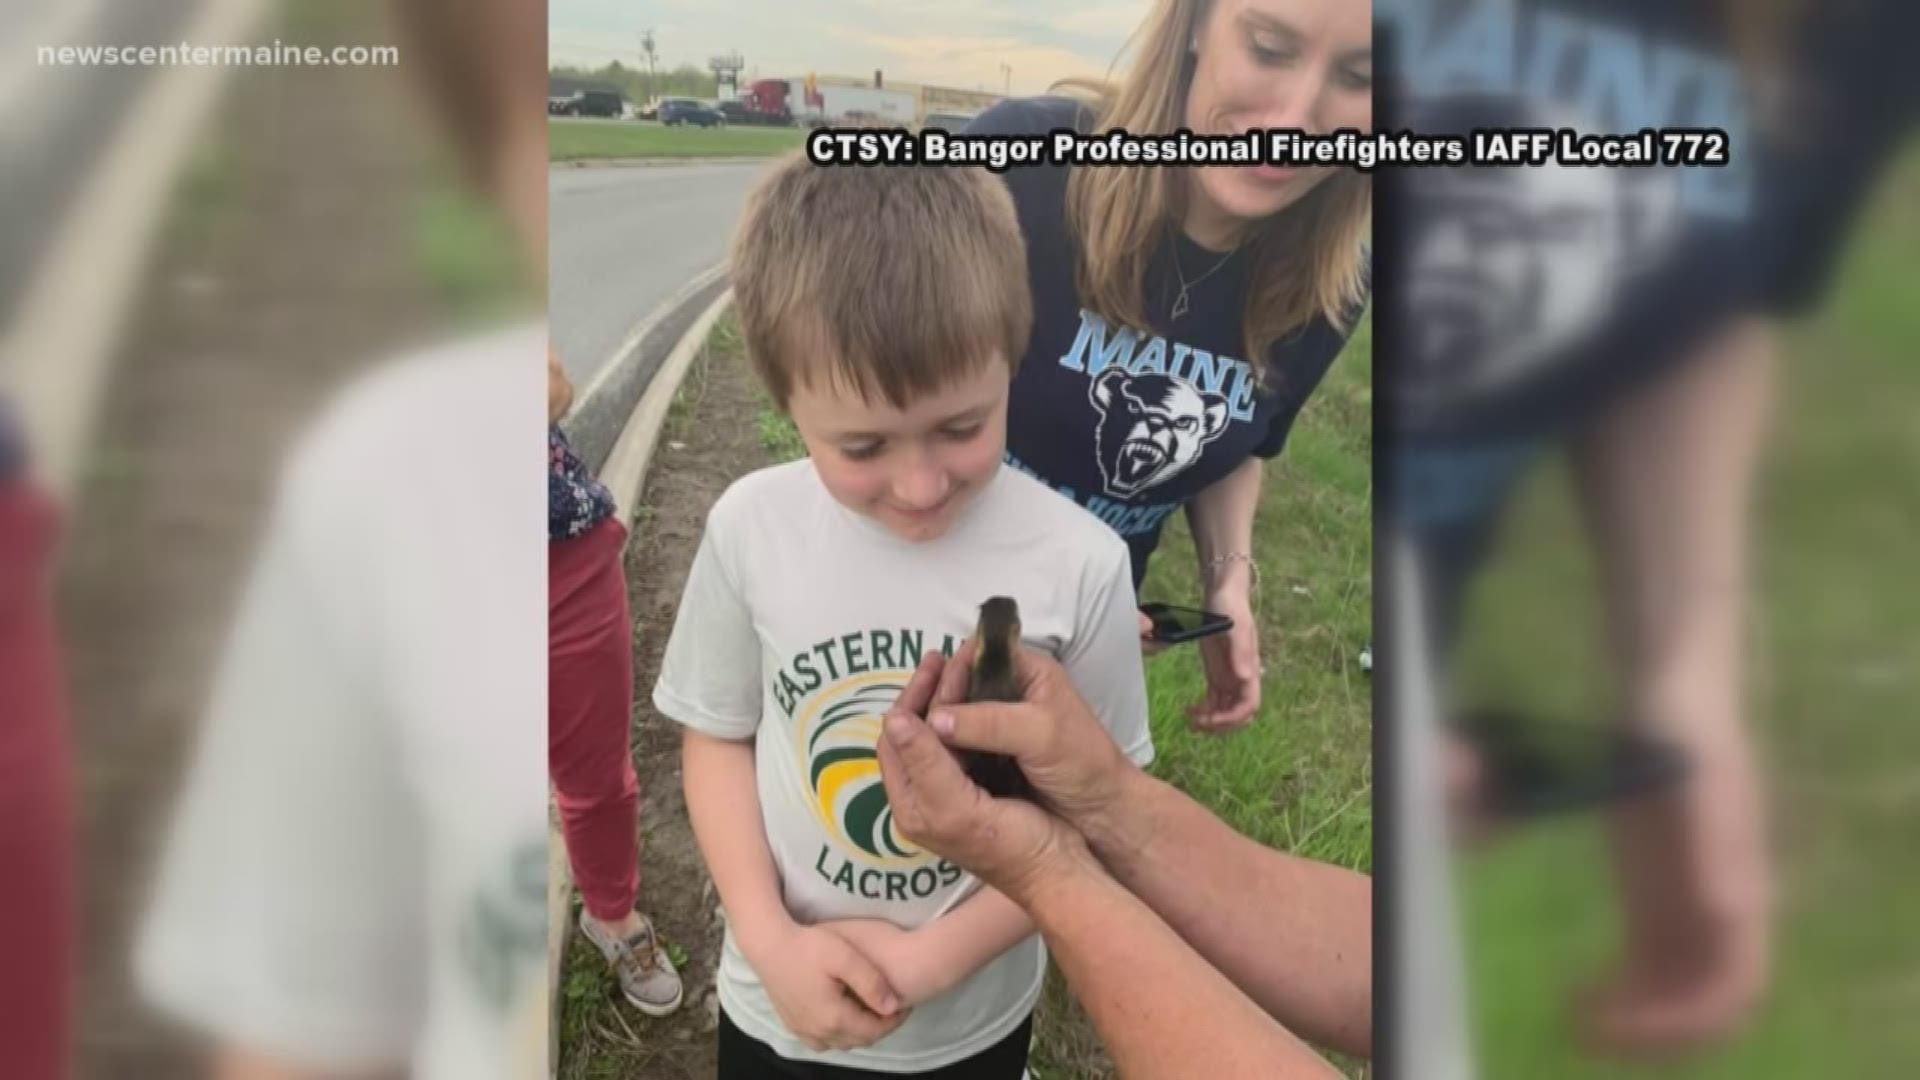 Bangor firefighters were called to perform a duck rescue when two ducklings fell into a storm drain. There is a happy ending. Thanks to the first responders the two baby ducks were reunited with their momma and the rest of their duck family.